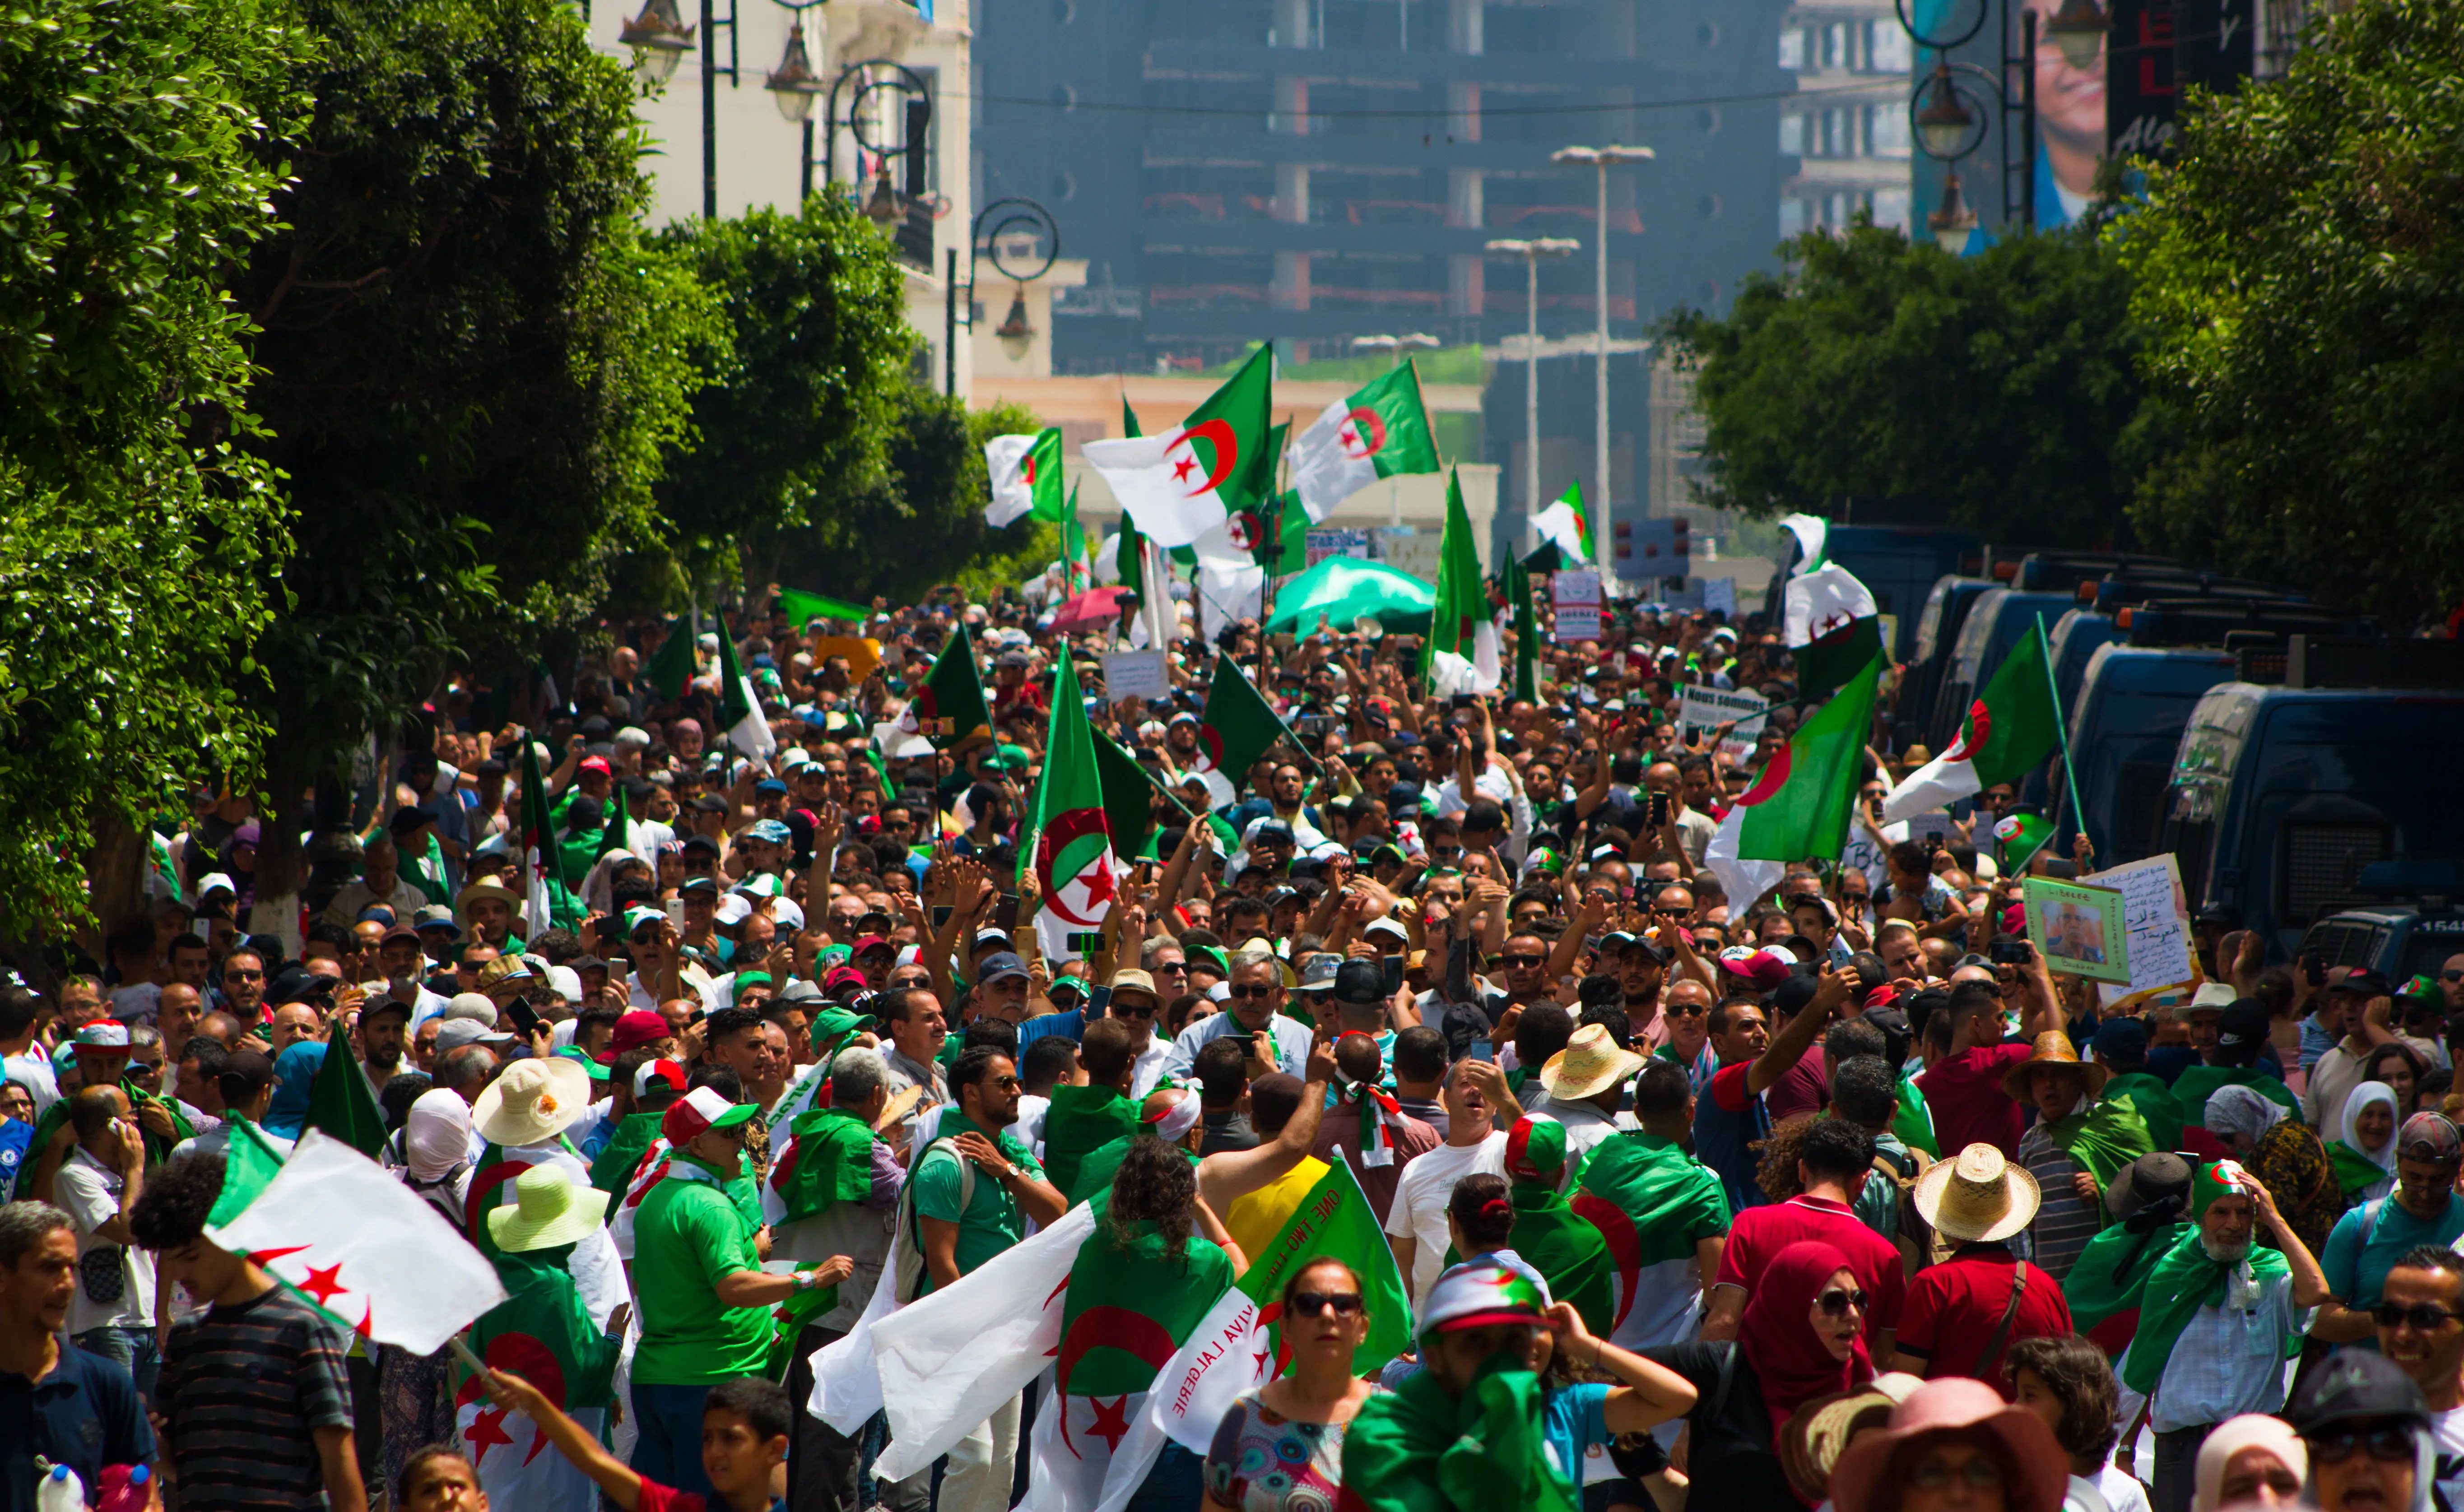 People protesting the street with Algerian flags